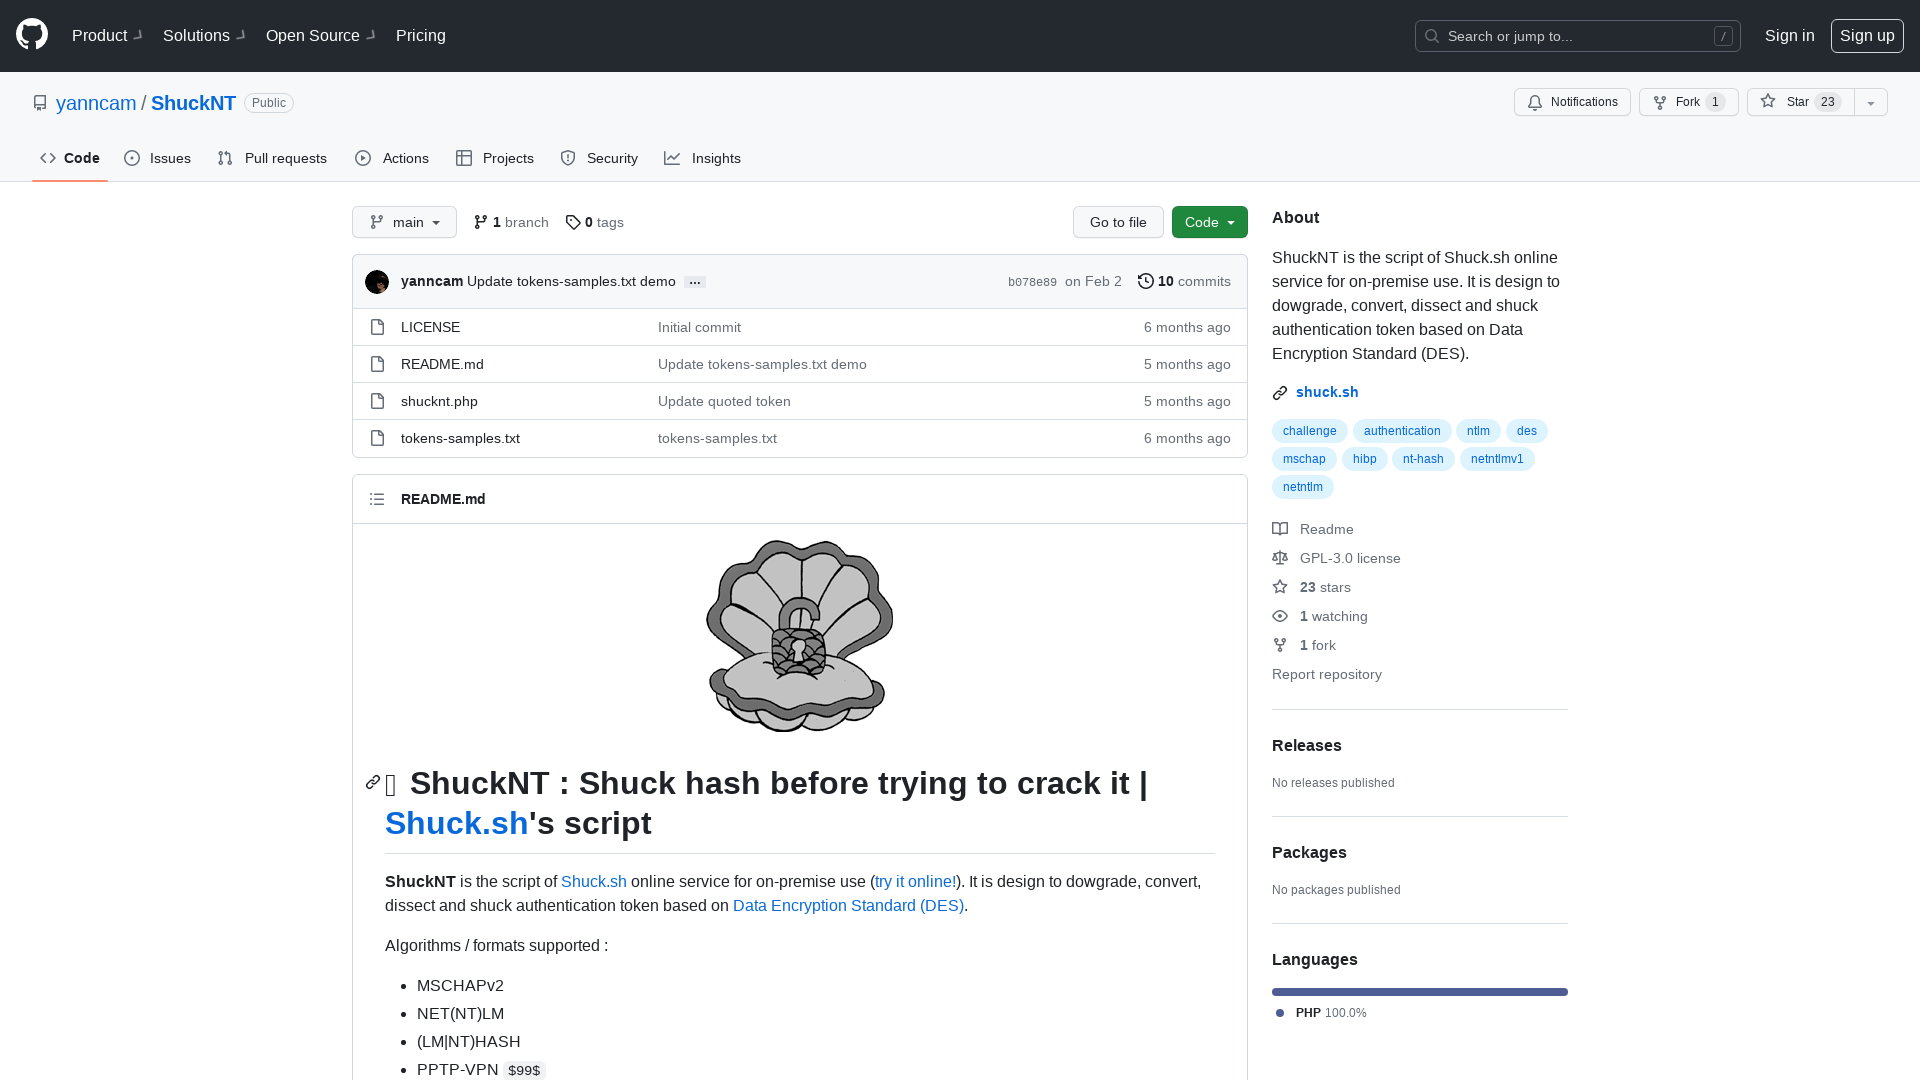 GitHub - yanncam/ShuckNT: ShuckNT is the script of Shuck.sh online service for on-premise use. It is design to dowgrade, convert, dissect and shuck authentication token based on Data Encryption Standard (DES).